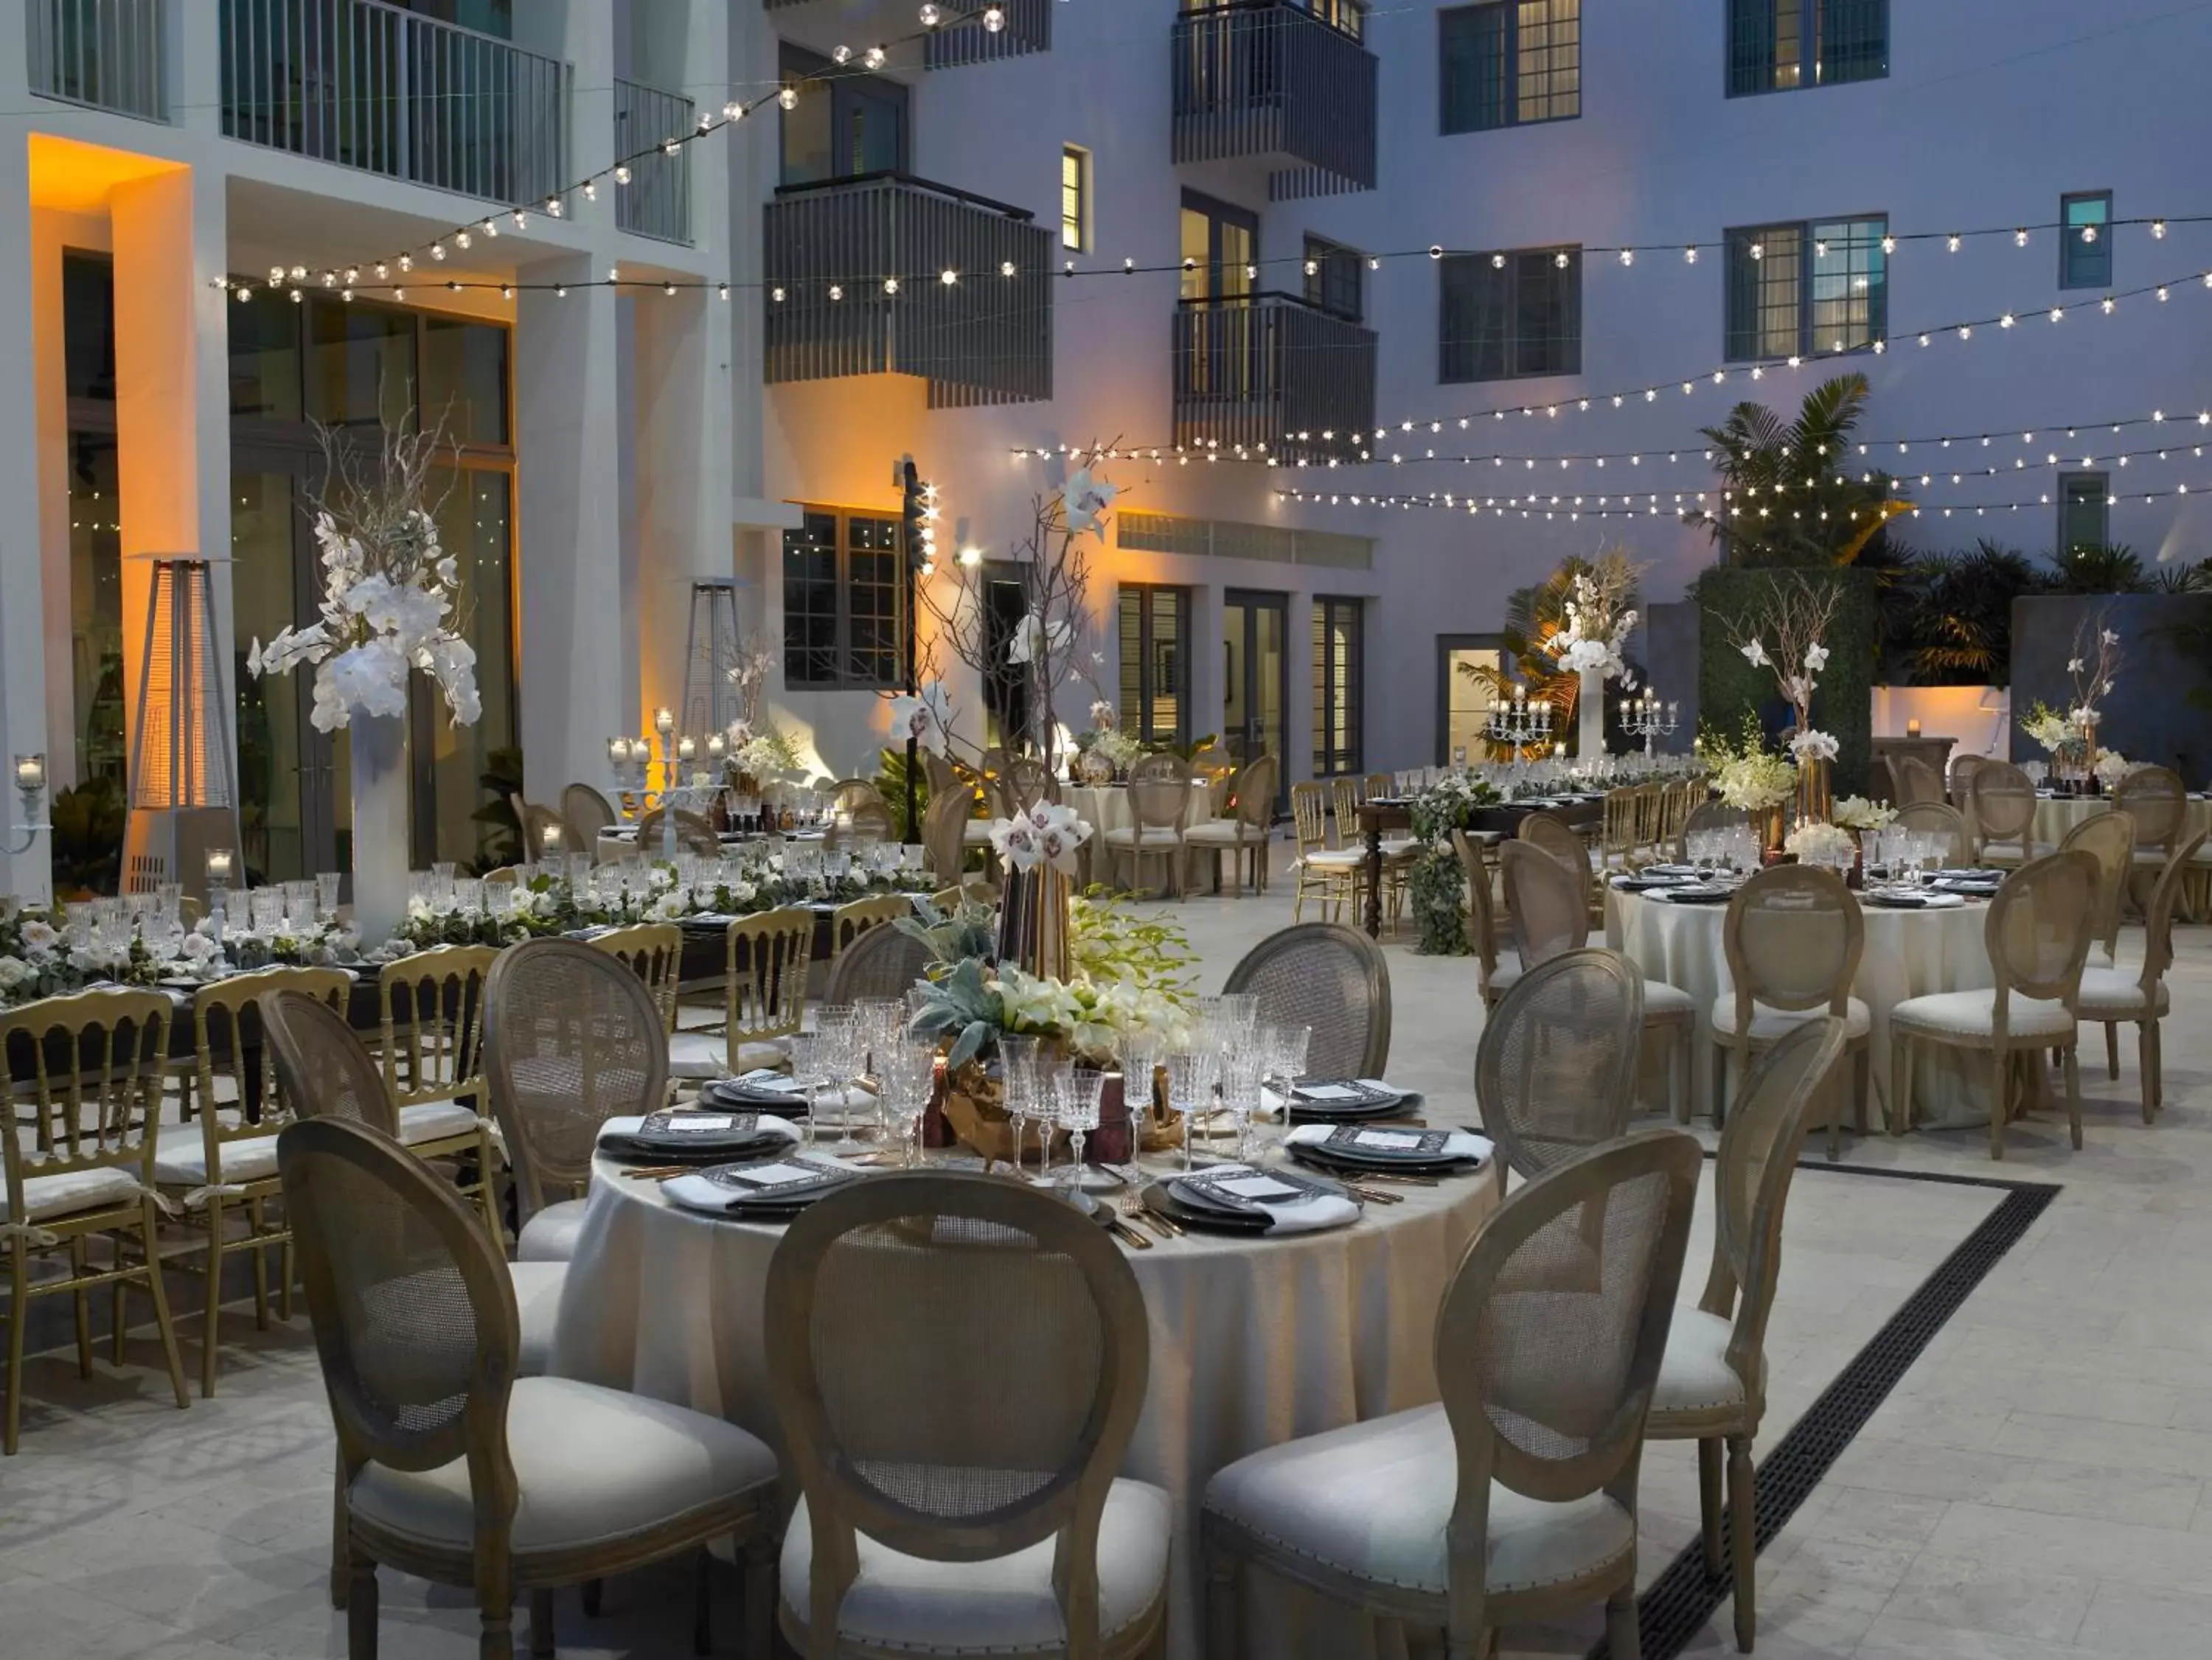 Banquet/Function facilities in The Betsy Hotel, South Beach